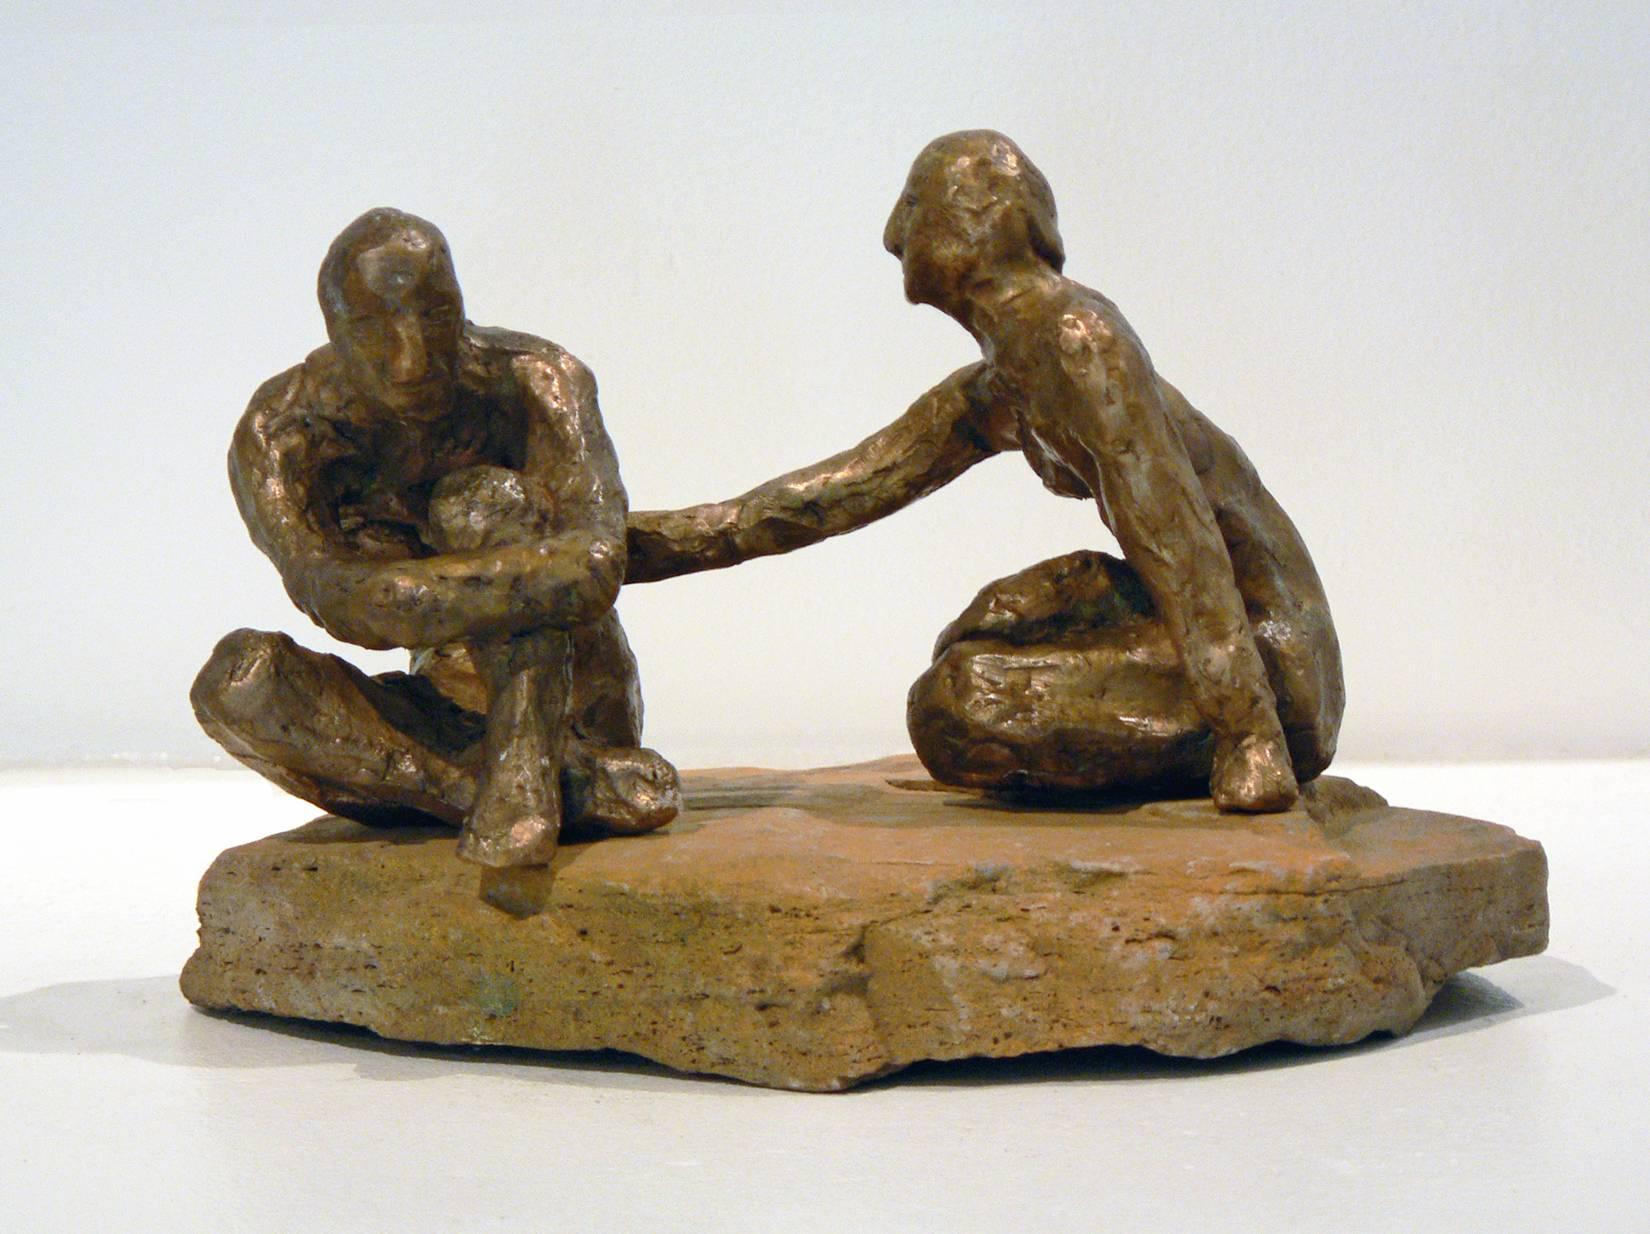 In this small, interactive, re-positionable bronze sculpture, Noa Bornstein invites the viewer to turn and manipulate the figures in relation to each other. This creates a reflection on relationship that is very interesting to the artist. Each